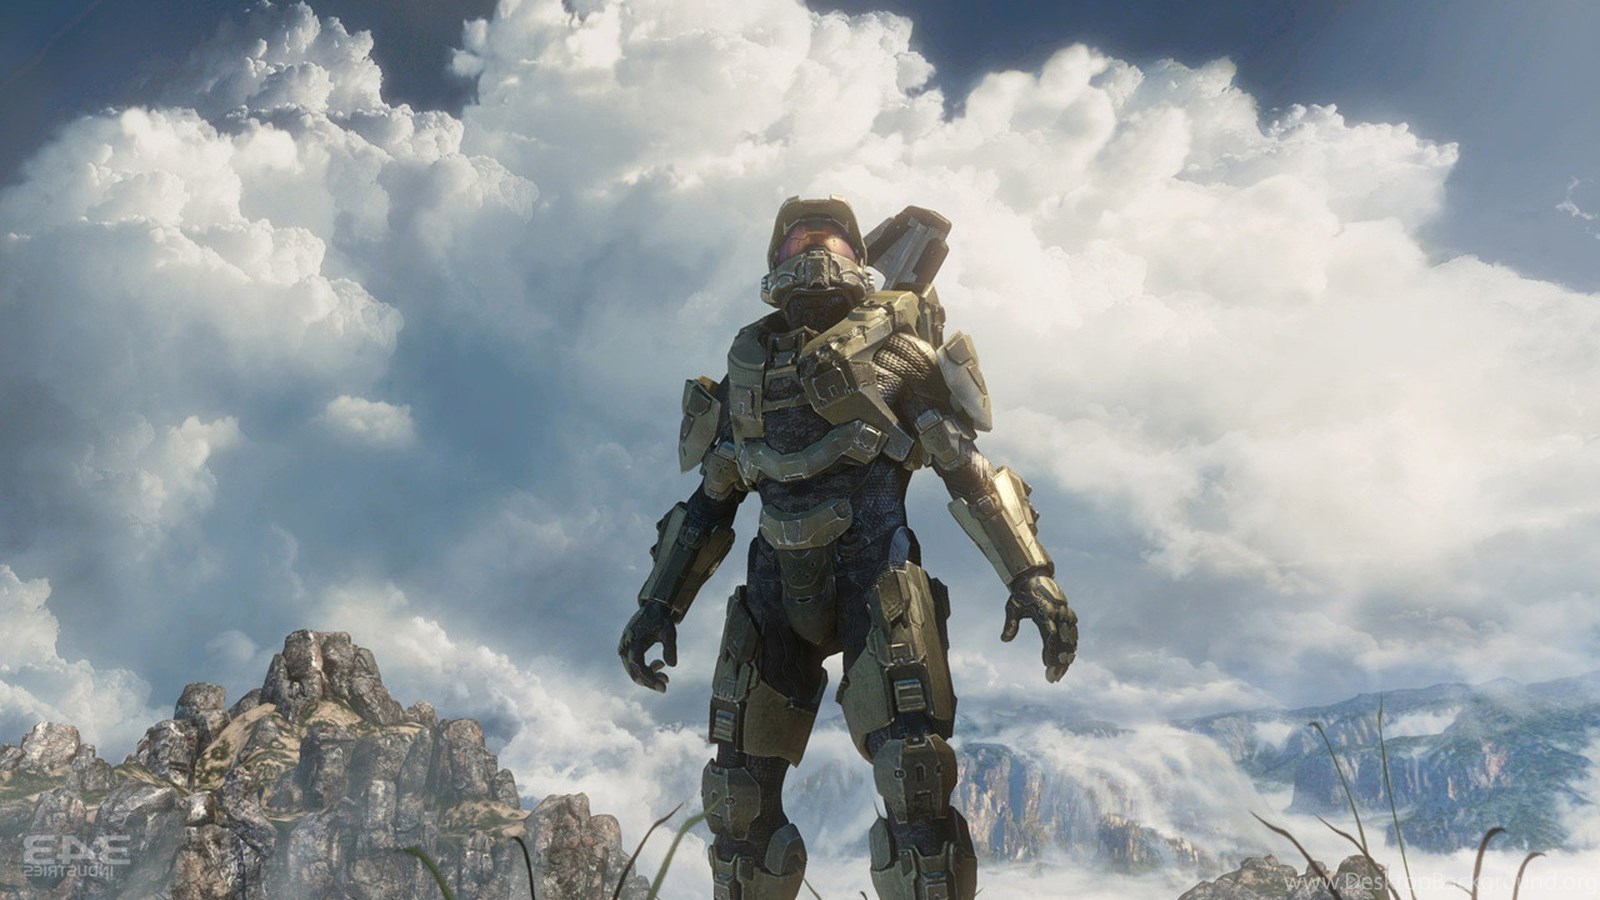 745227_halo-video-games-artwork-halo-4-halo-master-chief-collection_1920x1080_h.jpg